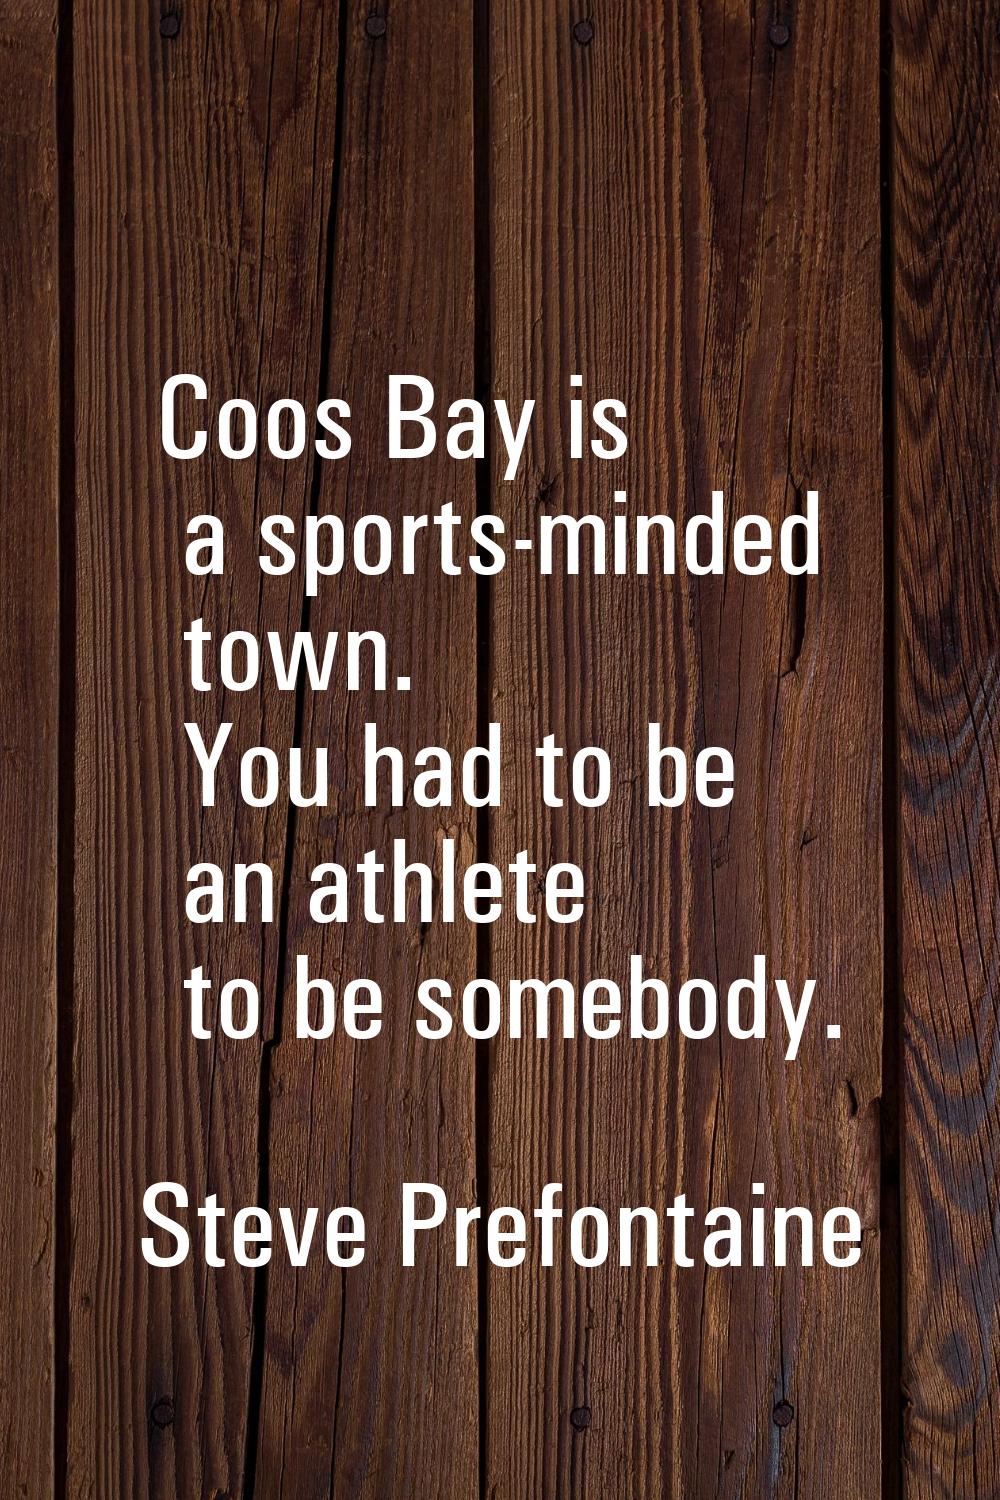 Coos Bay is a sports-minded town. You had to be an athlete to be somebody.